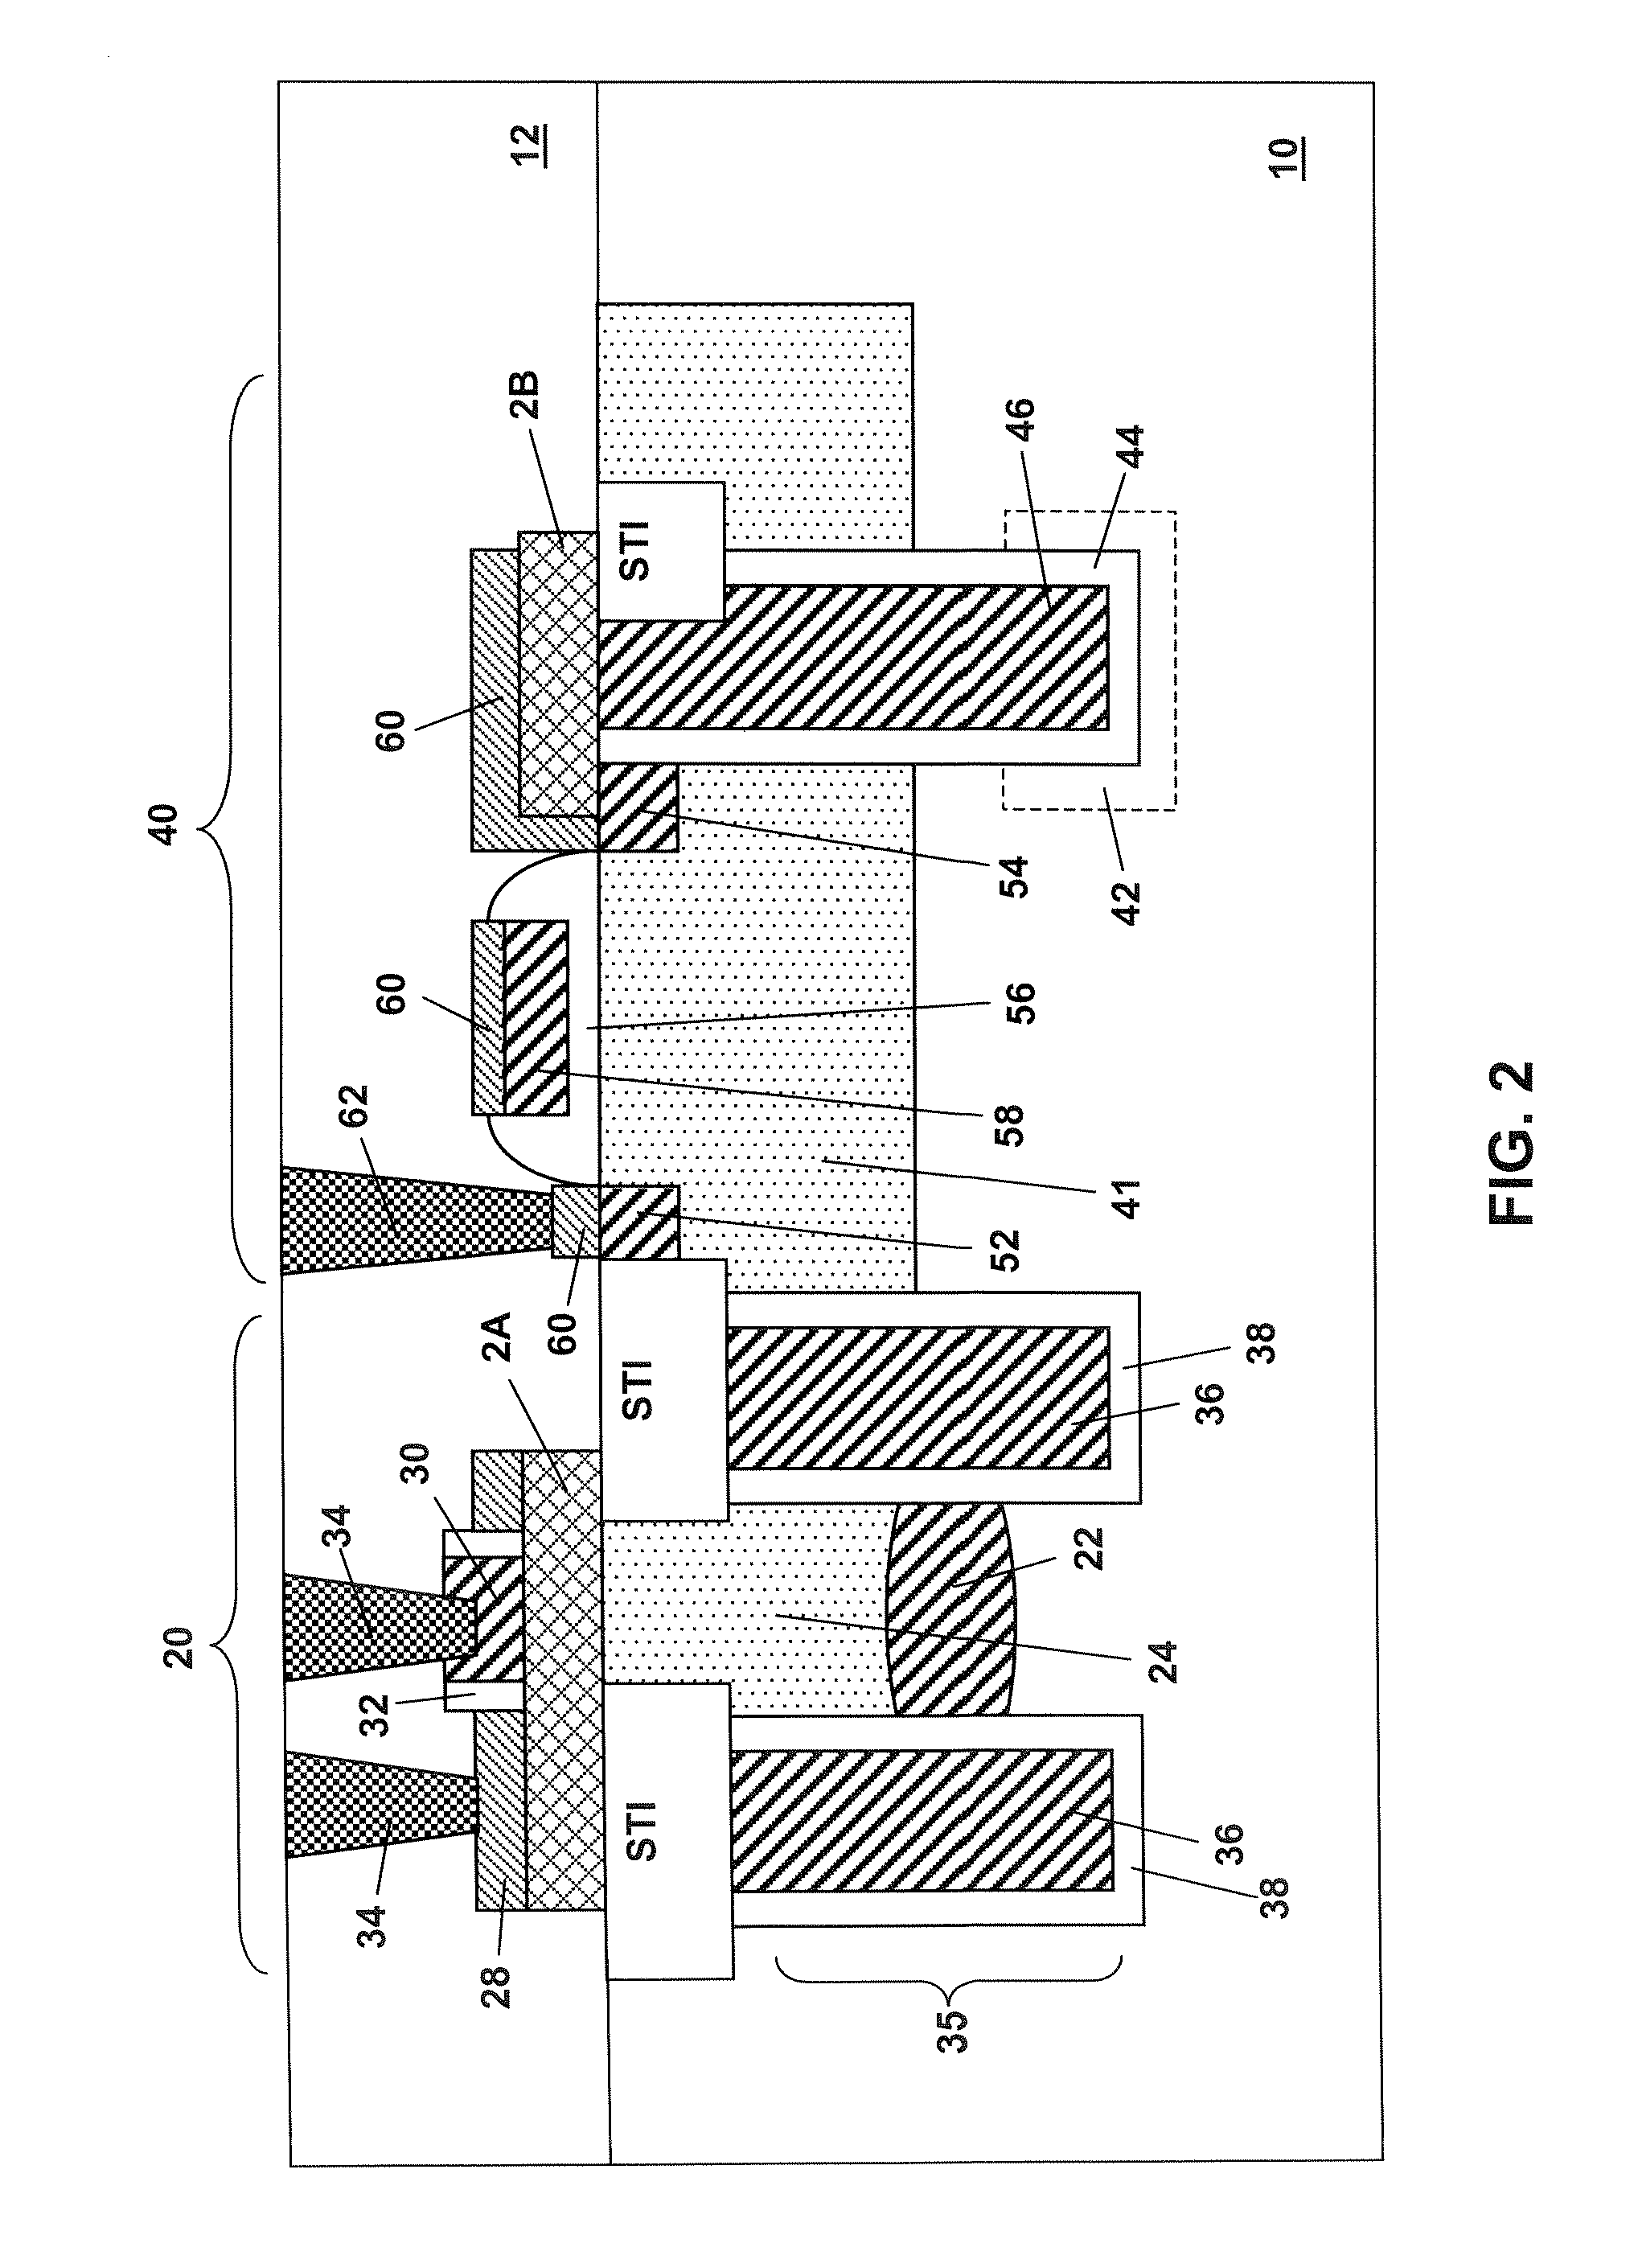 INTEGRATION OF A SiGe- OR SiGeC-BASED HBT WITH A SiGe- OR SiGeC-STRAPPED SEMICONDUCTOR DEVICE